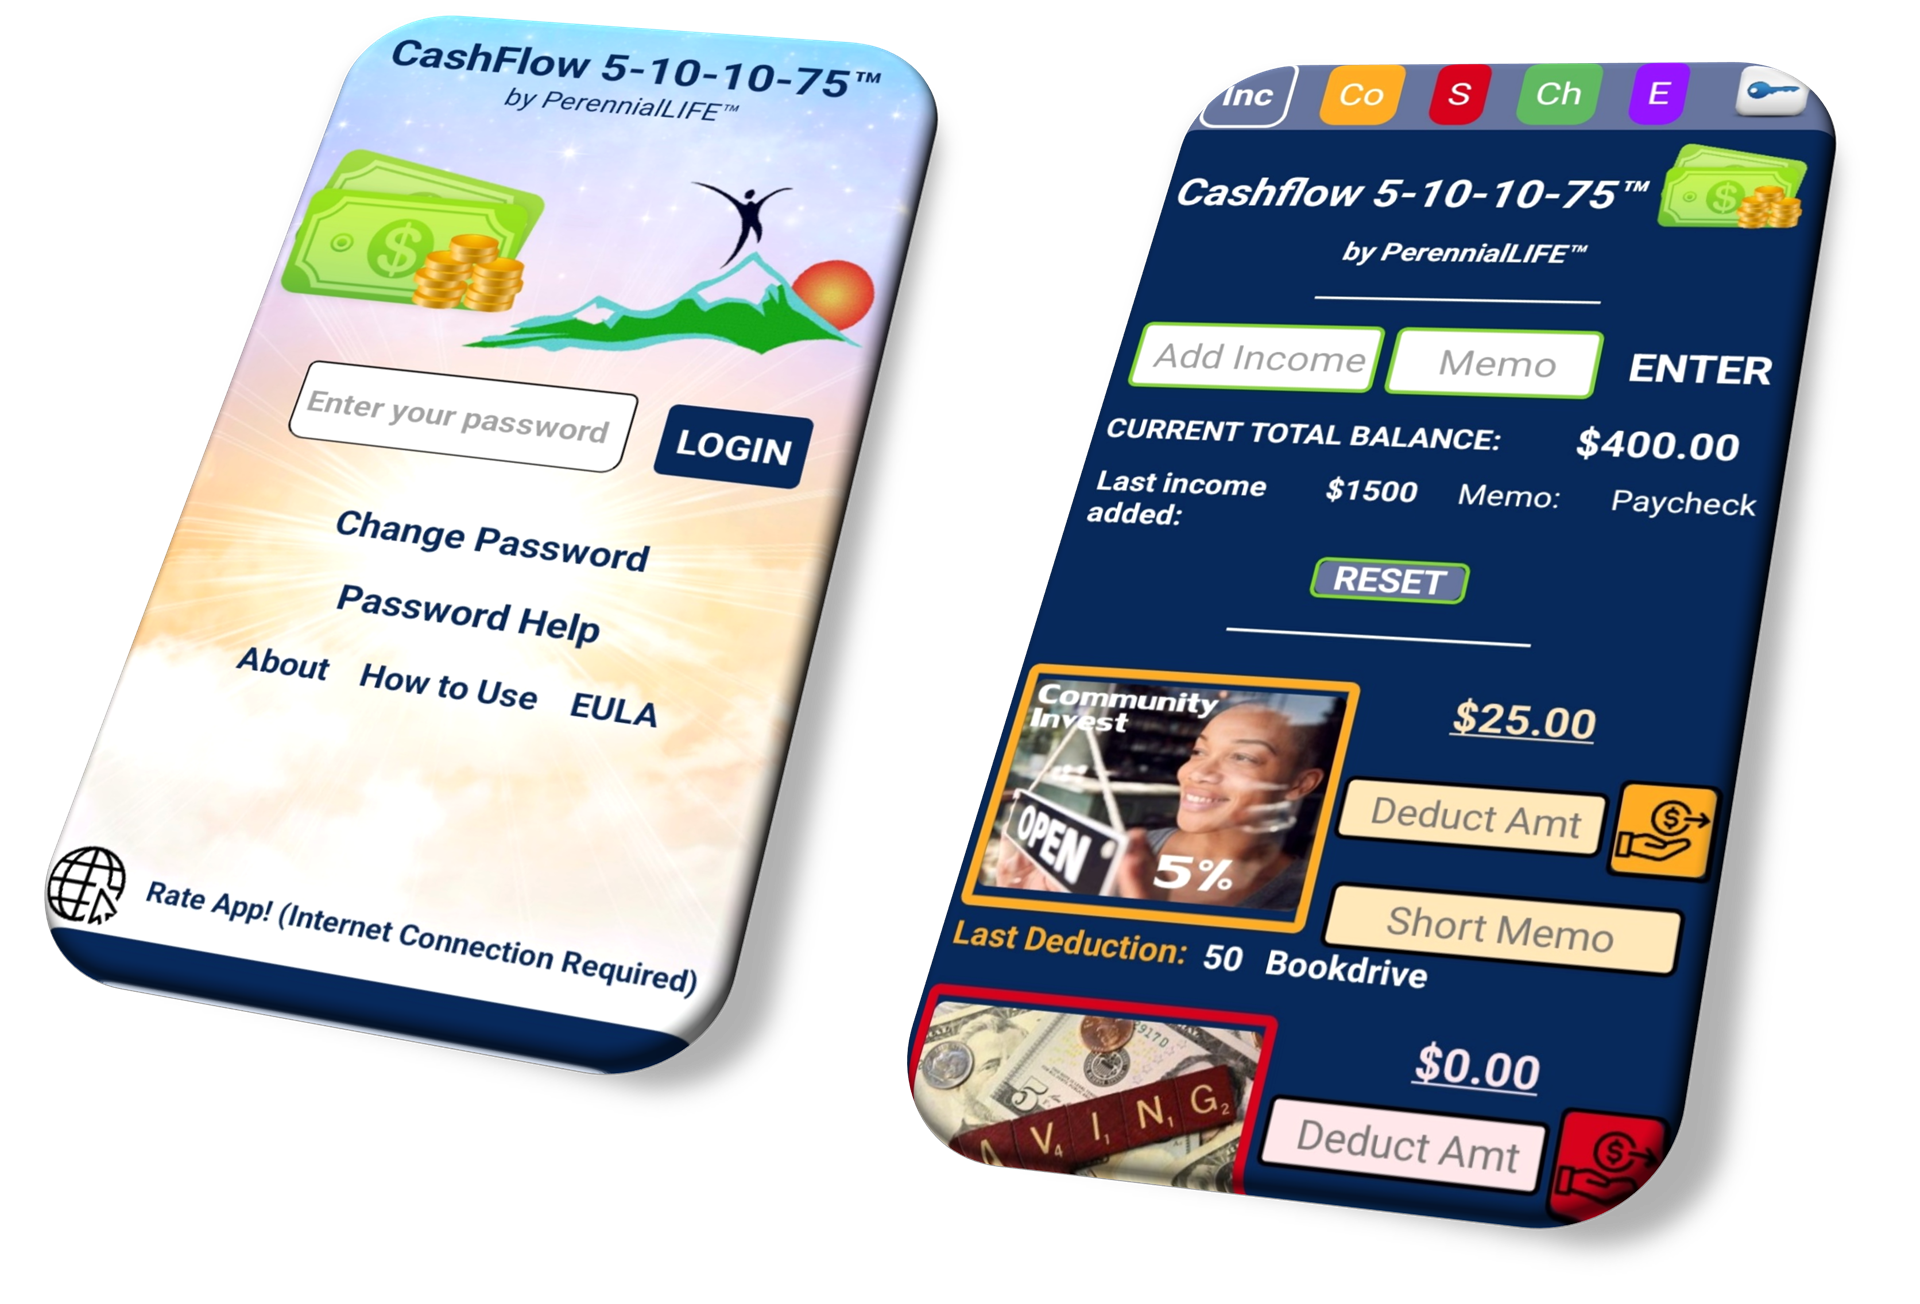 Click image to learn more about the CashFlow 5-10-10-75 app for iPhone and Android